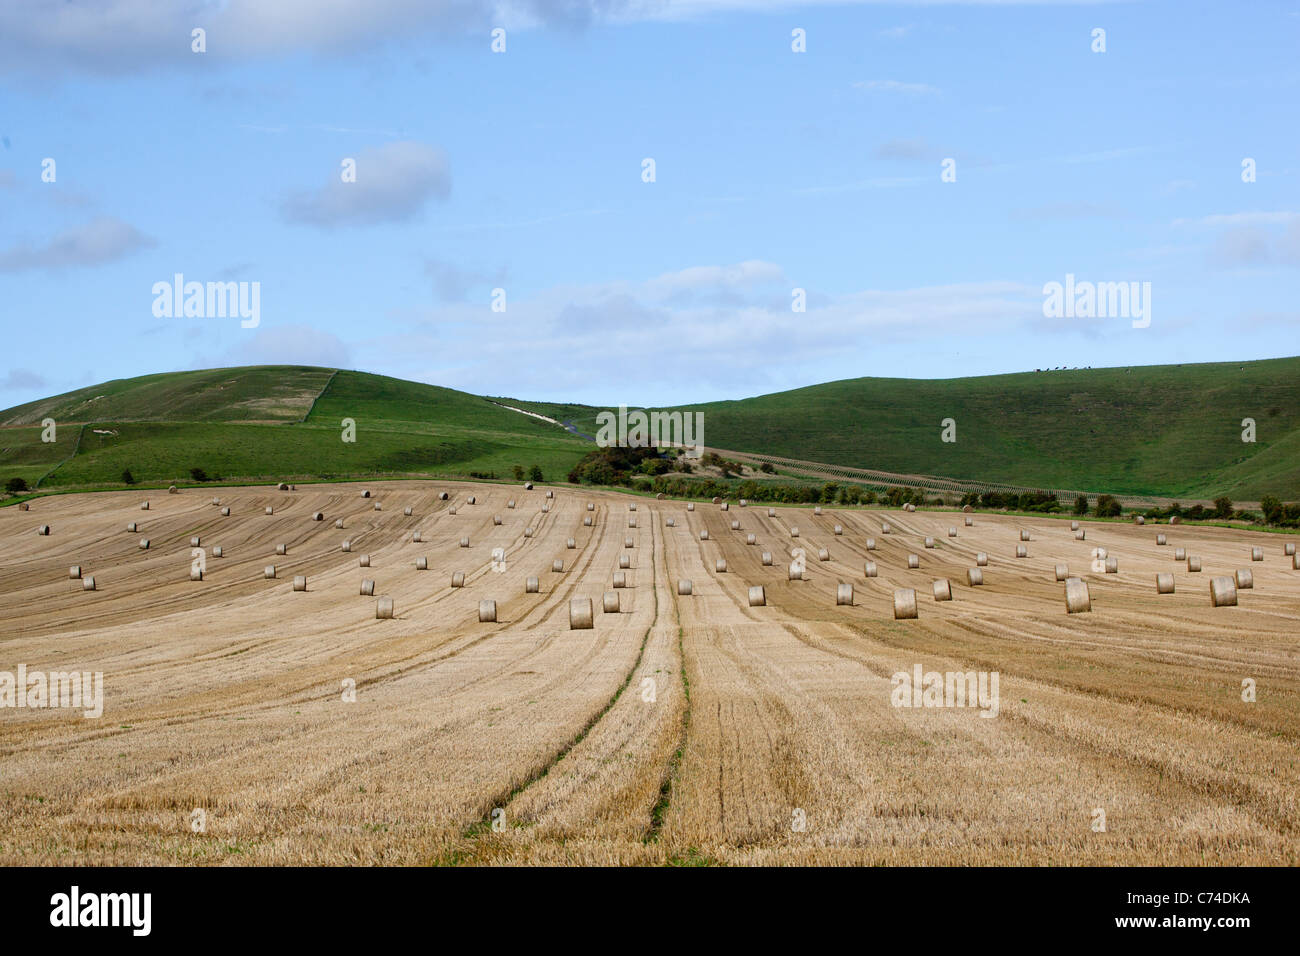 Harvested Wheat Field with Round Bales or Wheels of Hay Stock Photo